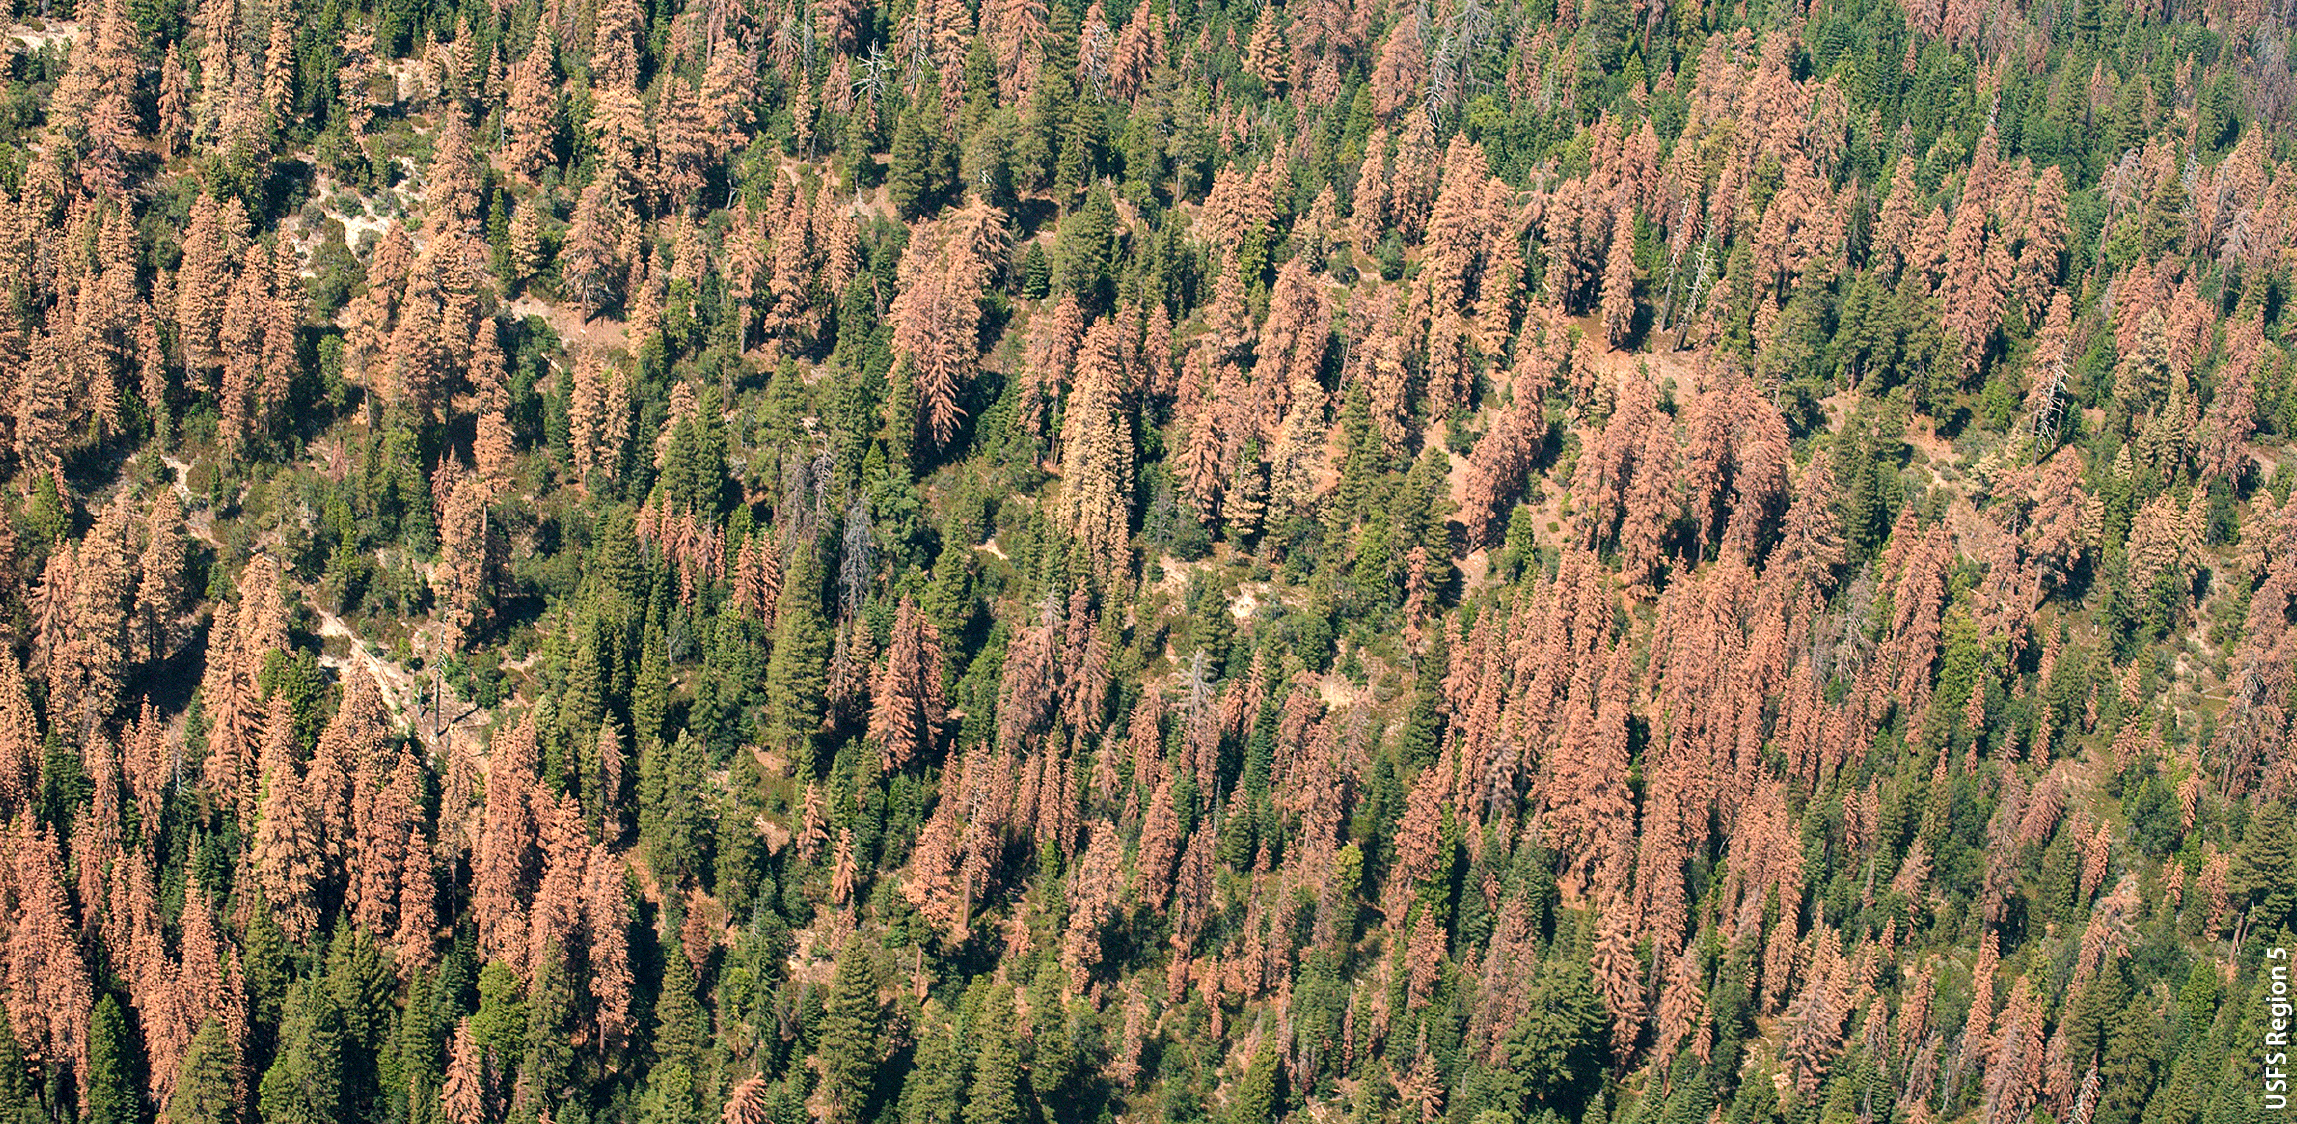 This photo from a 2016 aerial detection survey of the Sierra and Sequoia national forests shows a high concentration of dead and dying trees. Climate change is expected to lead to longer droughts and higher temperatures, stressing trees and making them more vulnerable to pests and diseases.